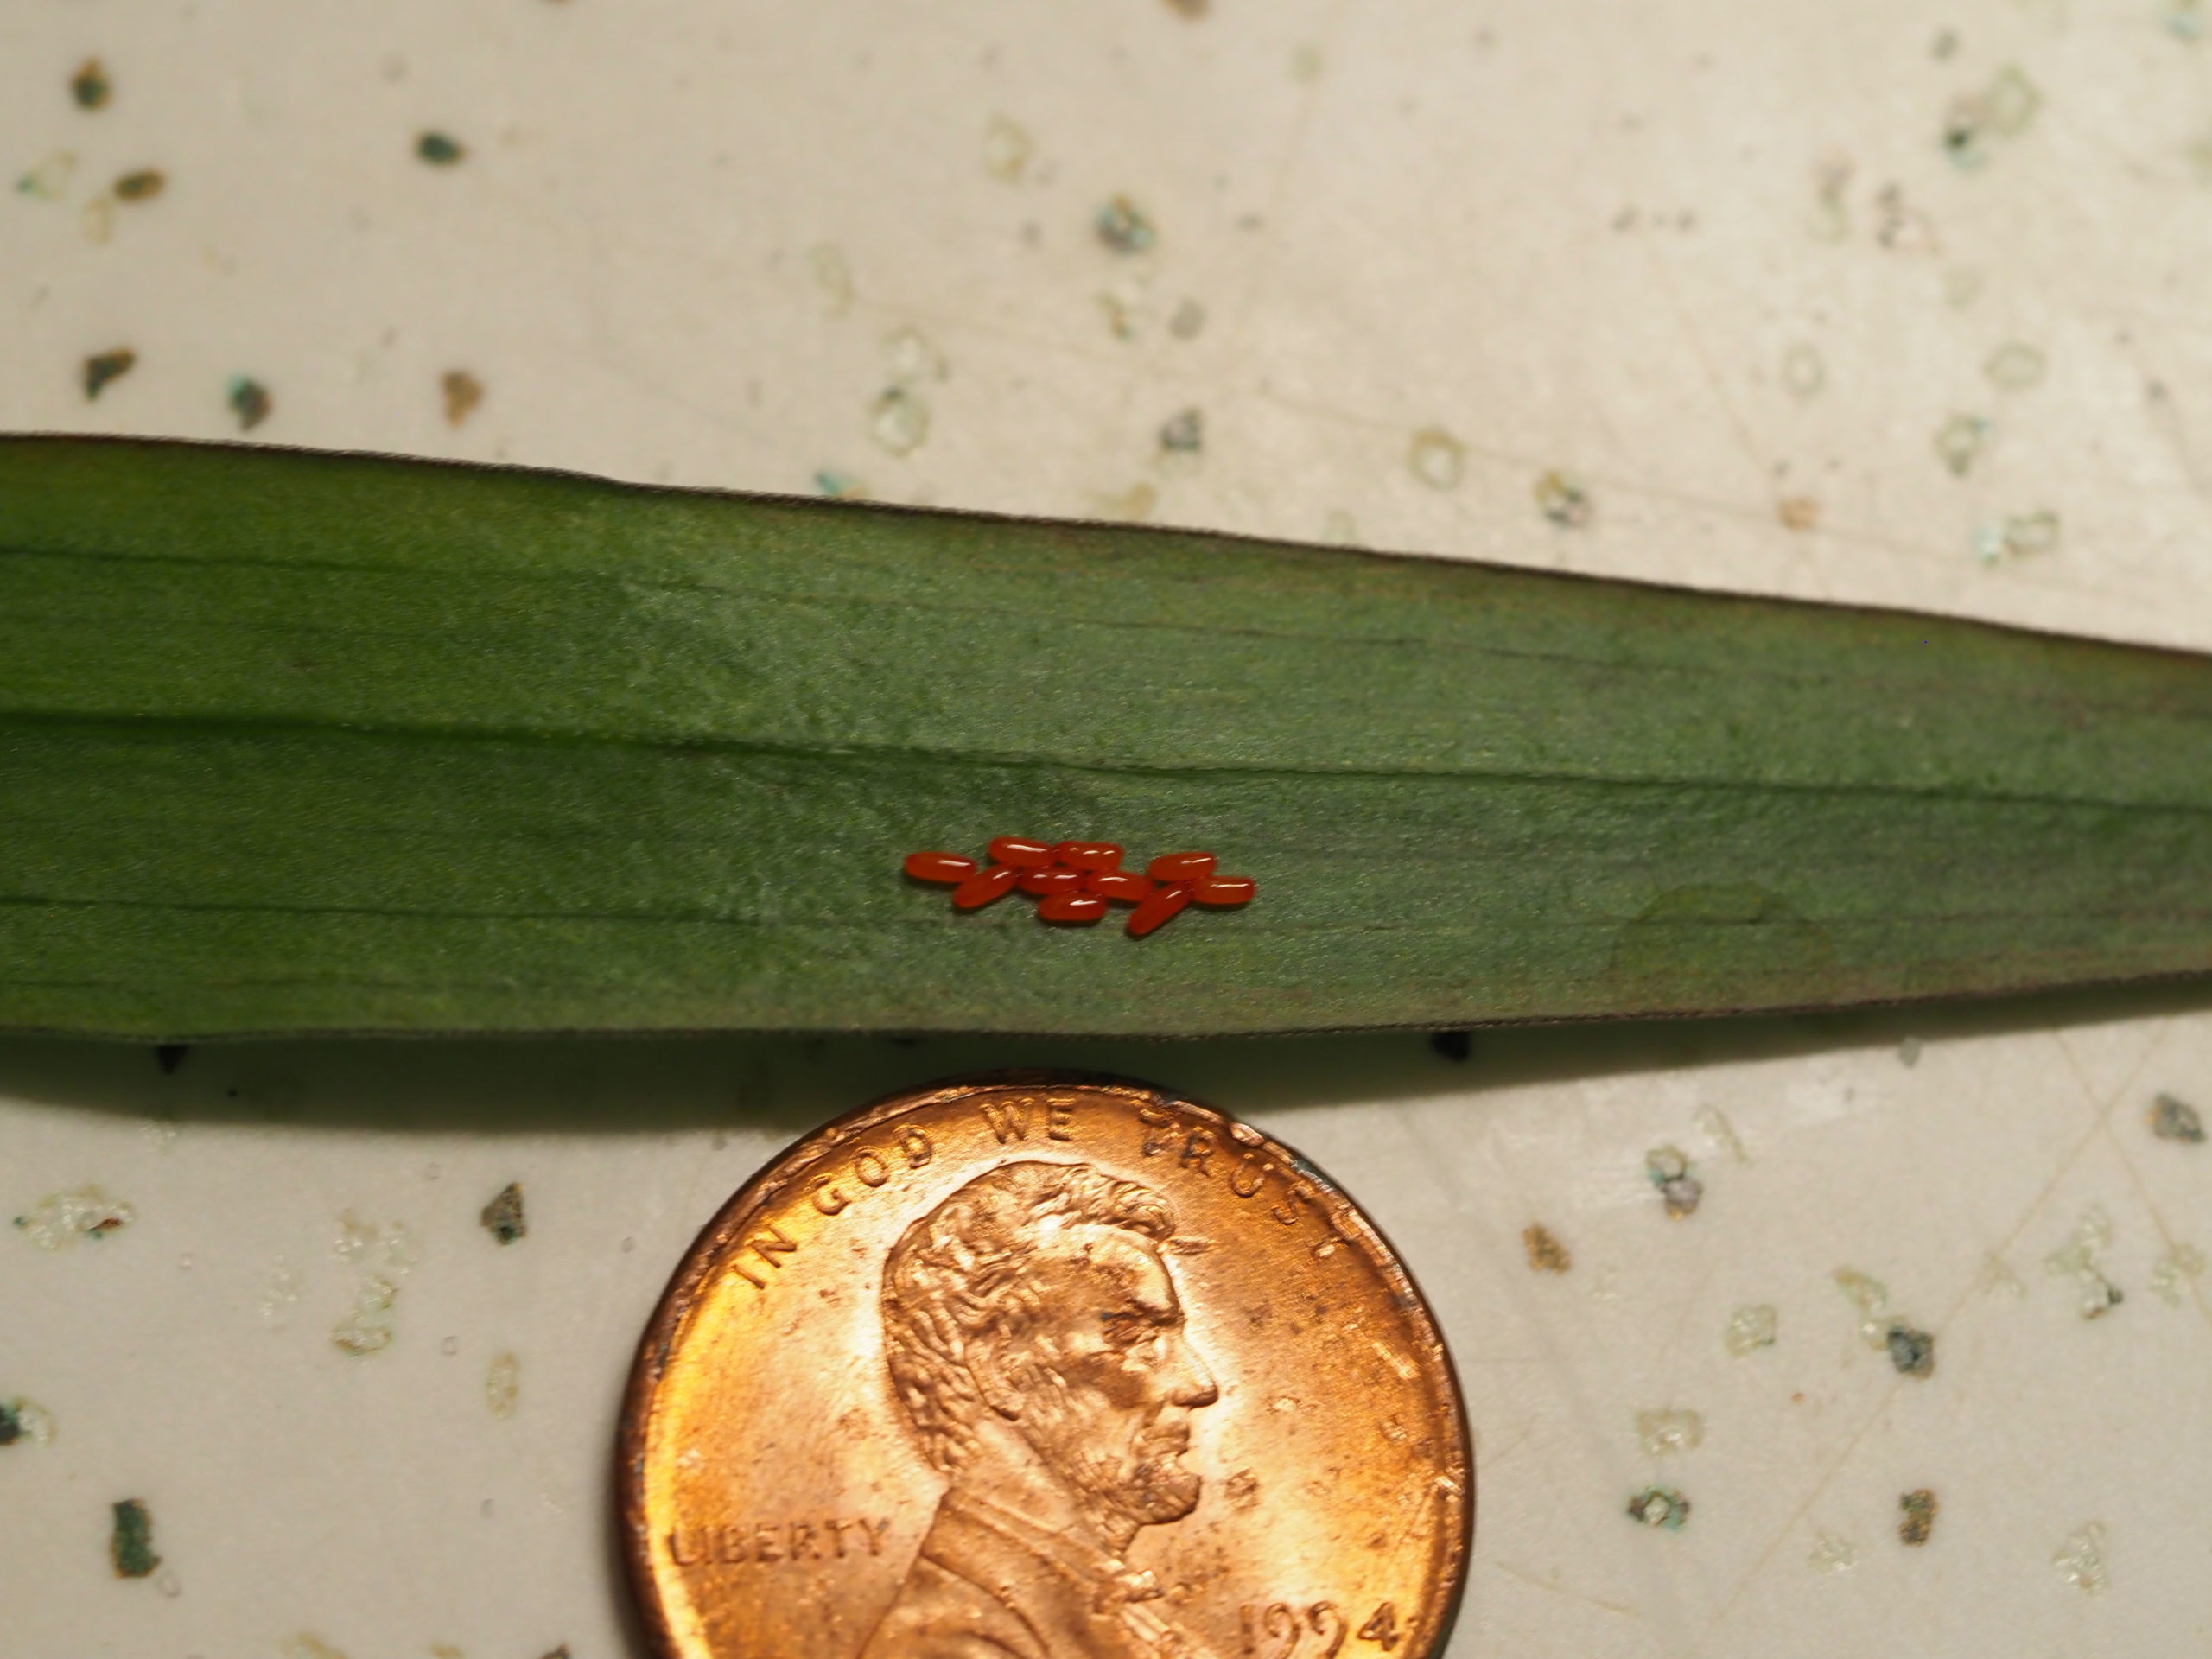 Red lily beetle eggs look like a red stripe from the distance, but up close each egg is the size of the “W” above Lincoln’s head. ANDREW MESSINGER